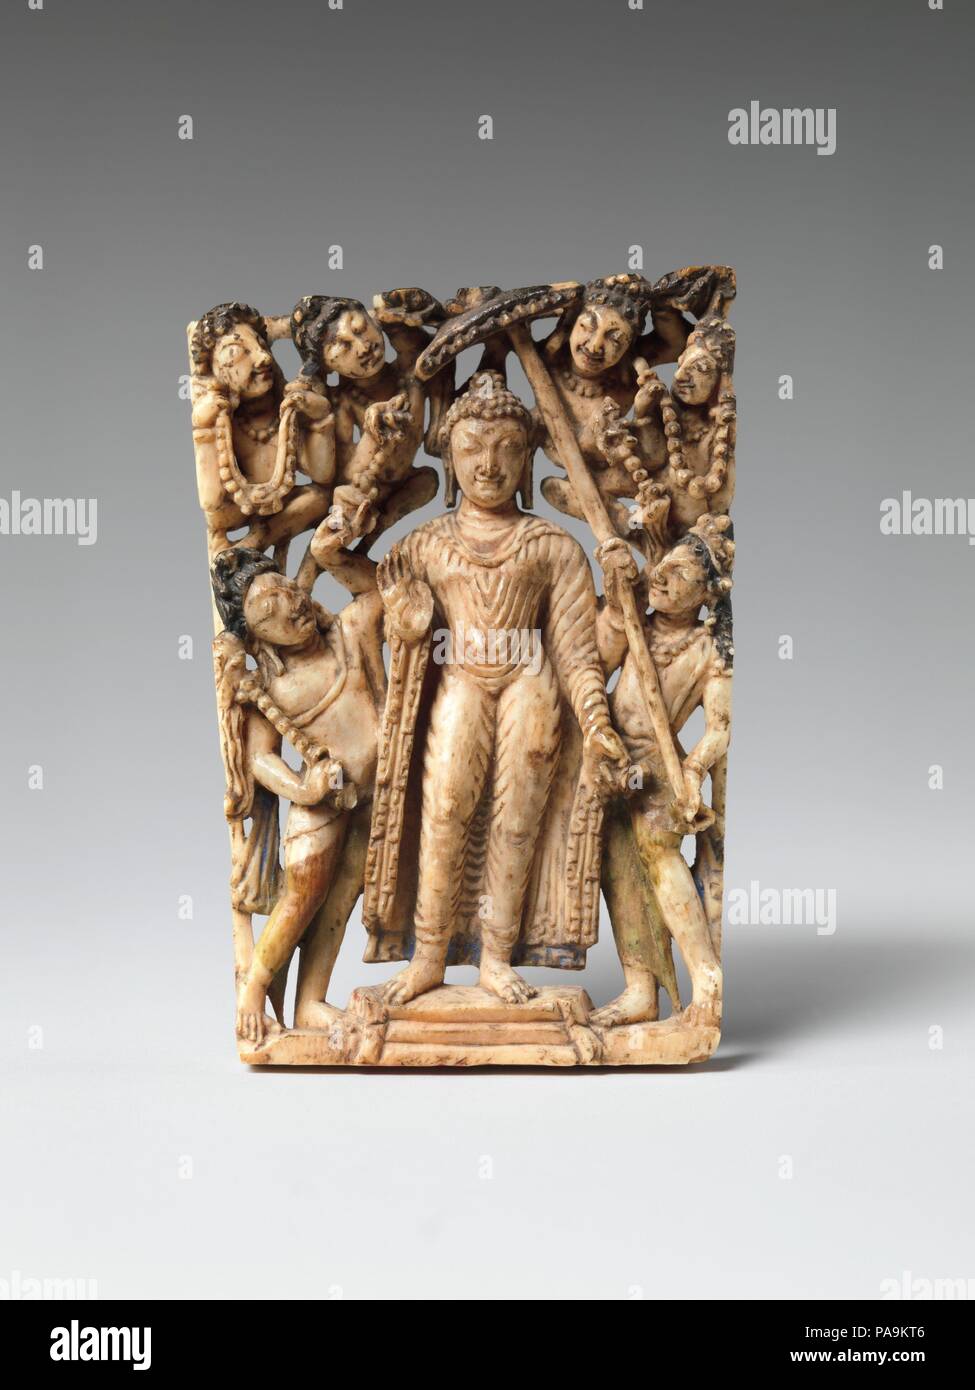 Panel from a Portable Shrine: The Descent of the Buddha from Trayastrimsha Heaven. Culture: India (Jammu and Kashmir, ancient kingdom of Kashmir),. Dimensions: H. 2 1/2 (6.4 cm); W. 1 3/4 in. (4.5 cm). Date: 7th-8th century.  This diminutive panel depicts the Buddha's descent from Trayastrimsha heaven, where he visited to preach the Buddhist gospel (dharma) to his mother, who had died soon after his birth. The three steps below his feet indicate the ladder upon which he descended. This miracle was widely depicted in the early Buddhist world. Here, umbrella and flywhisk bearers attend the Buddh Stock Photo